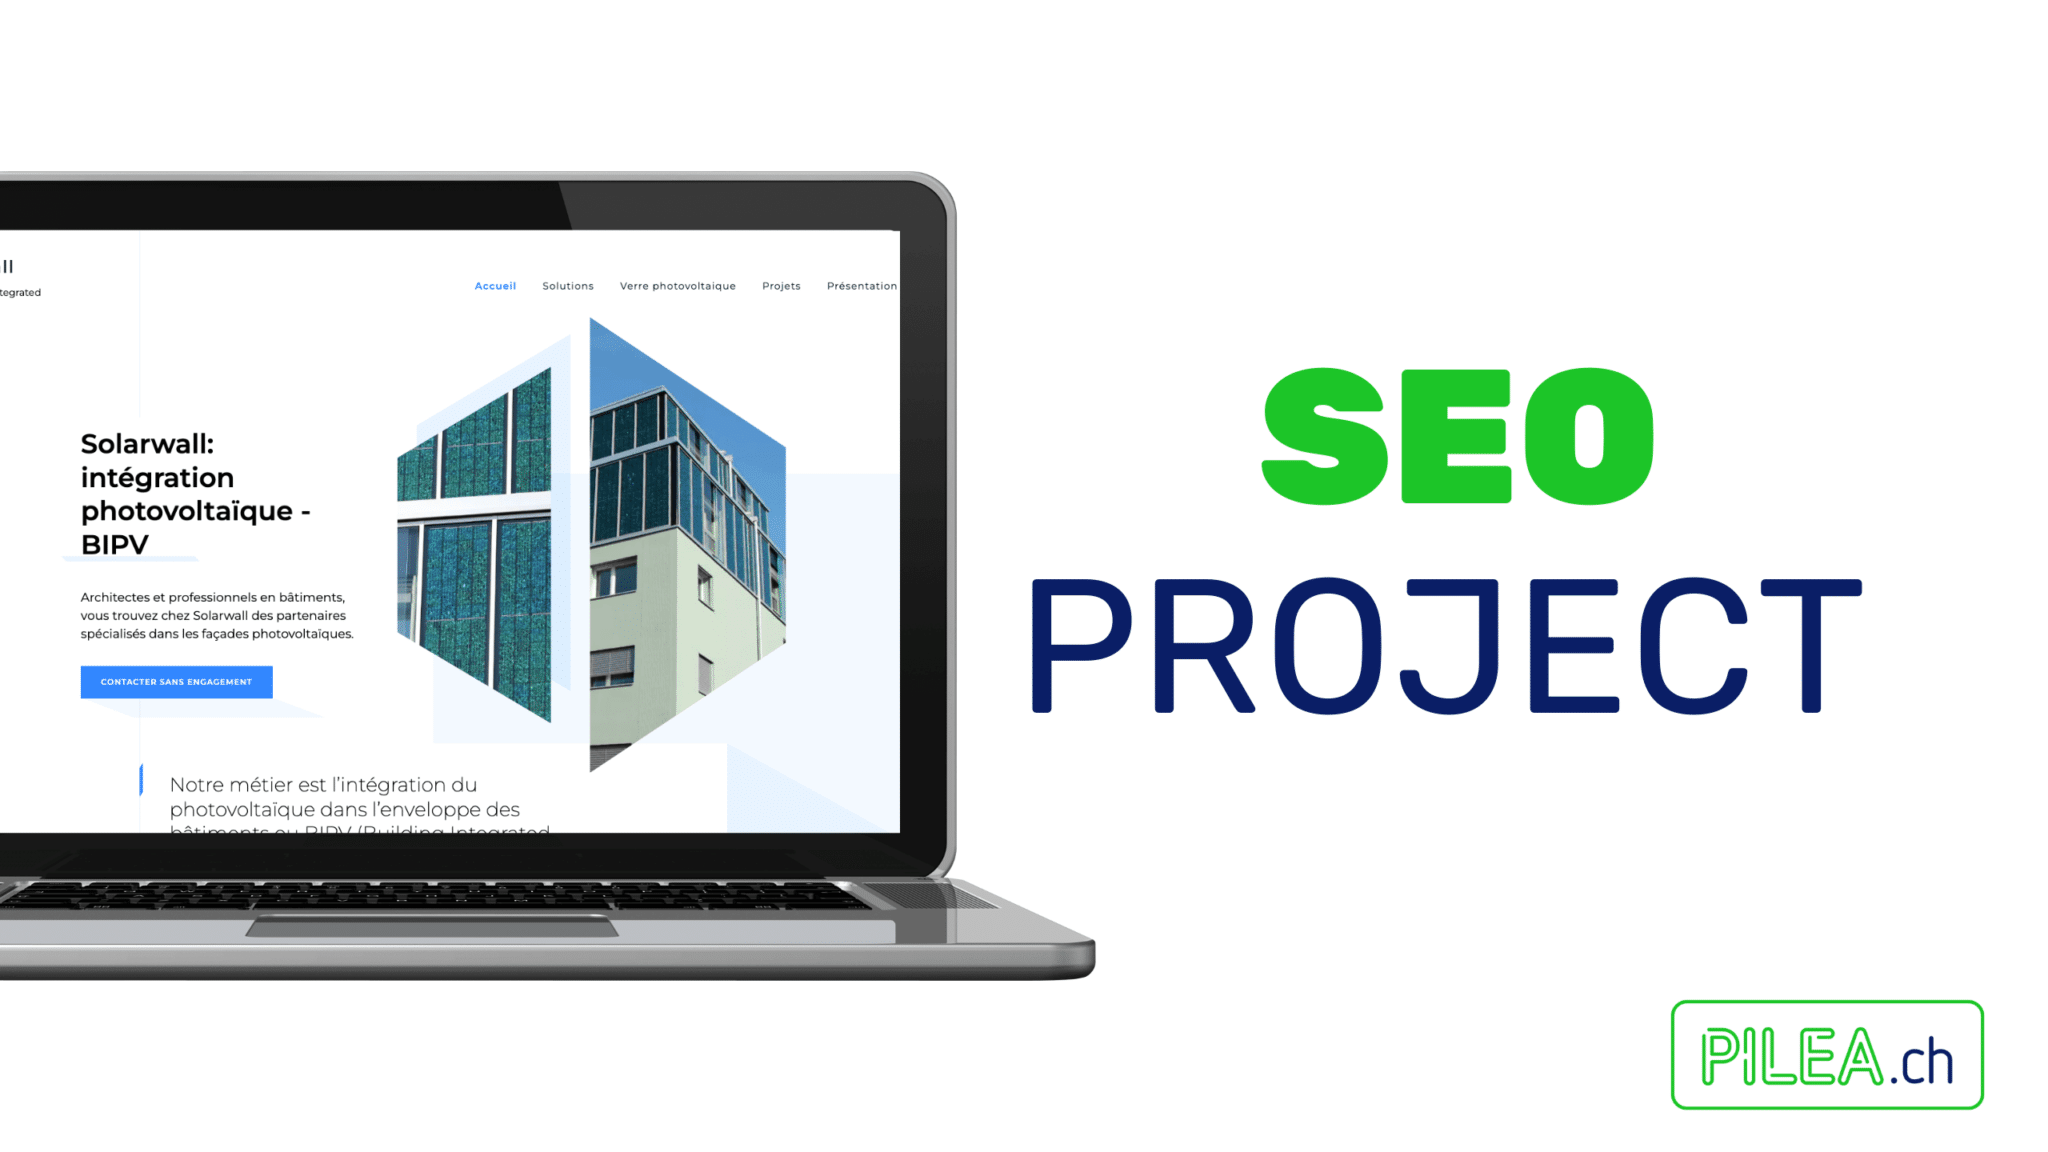 SEO Project: Website relaunch for Solarwall, by Isaline Muelhauser, SEO Consultant